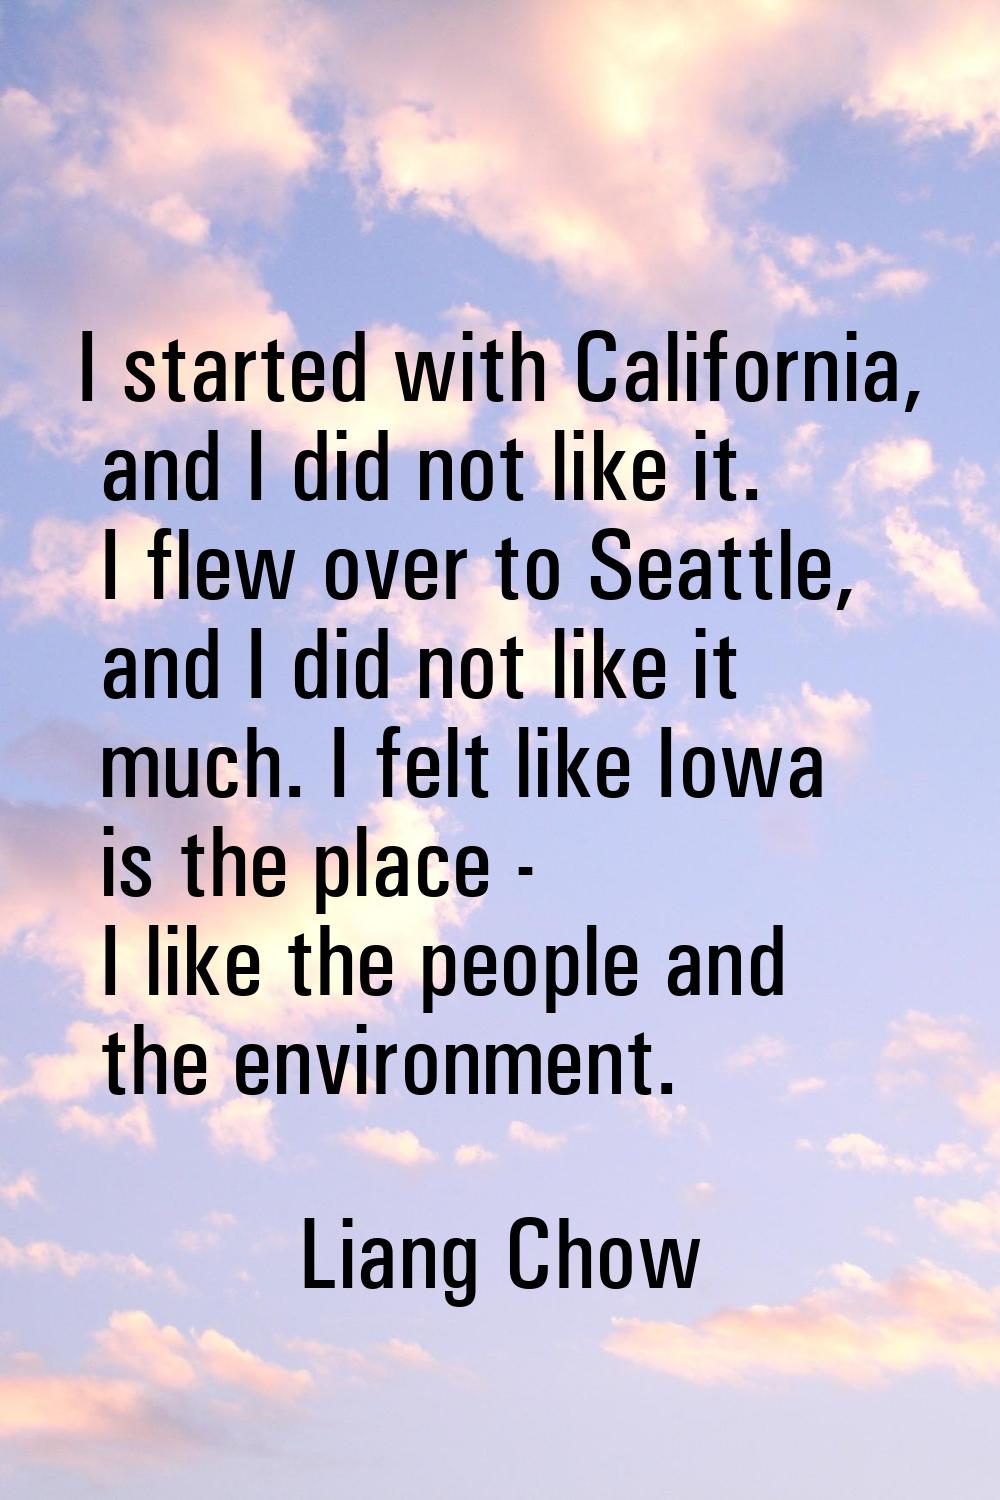 I started with California, and I did not like it. I flew over to Seattle, and I did not like it muc